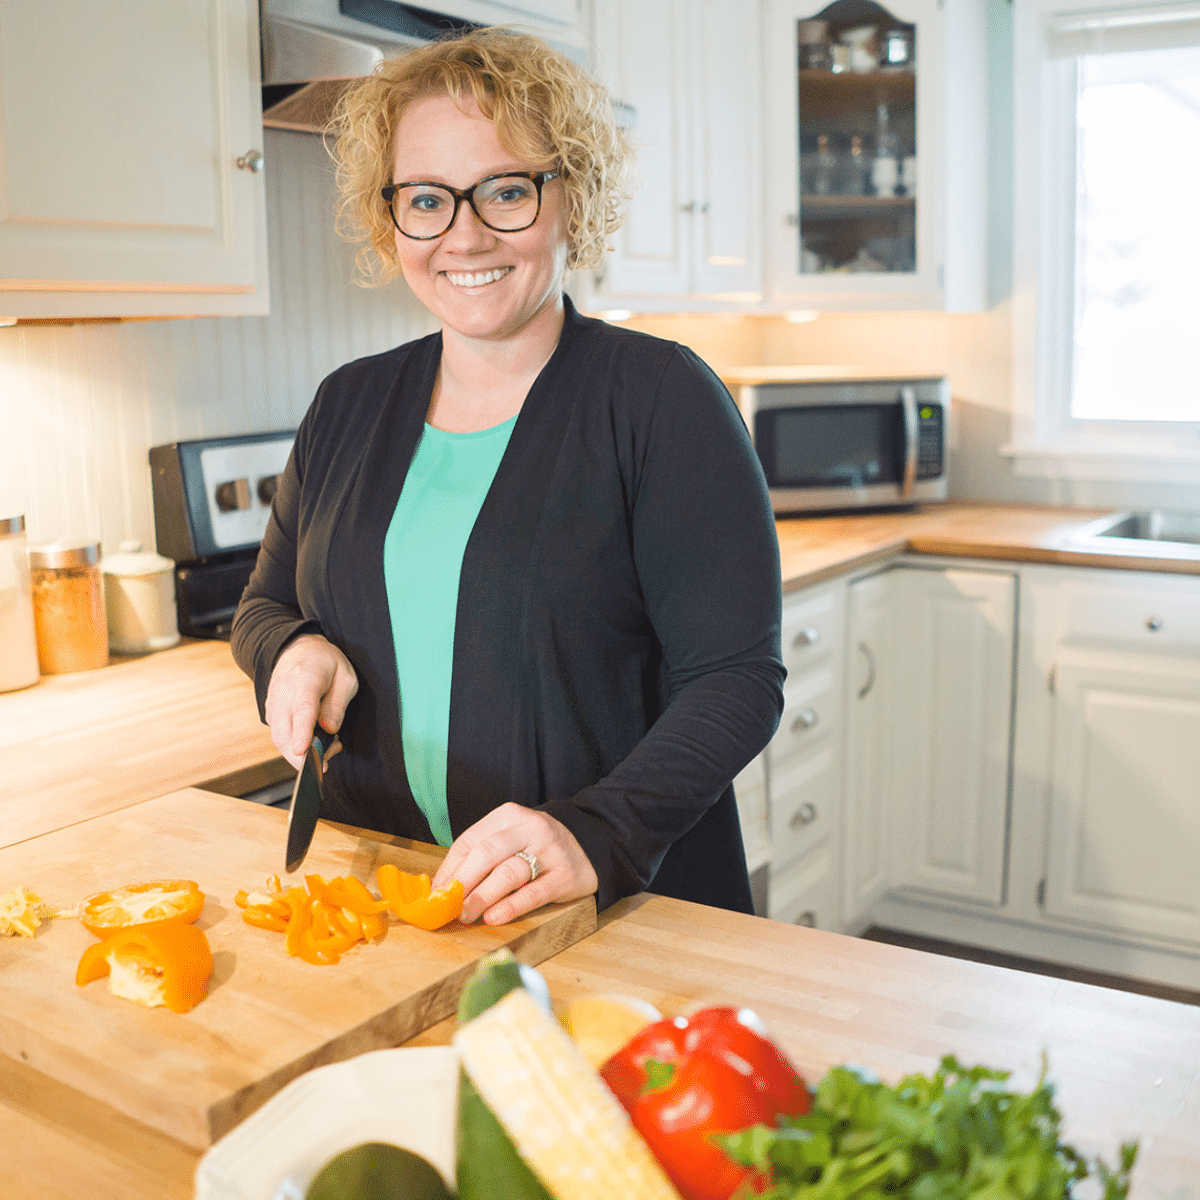 Cindy gordon wearing a black shirt and a green shirt dicing vegetables on a cutting board in a kitchen